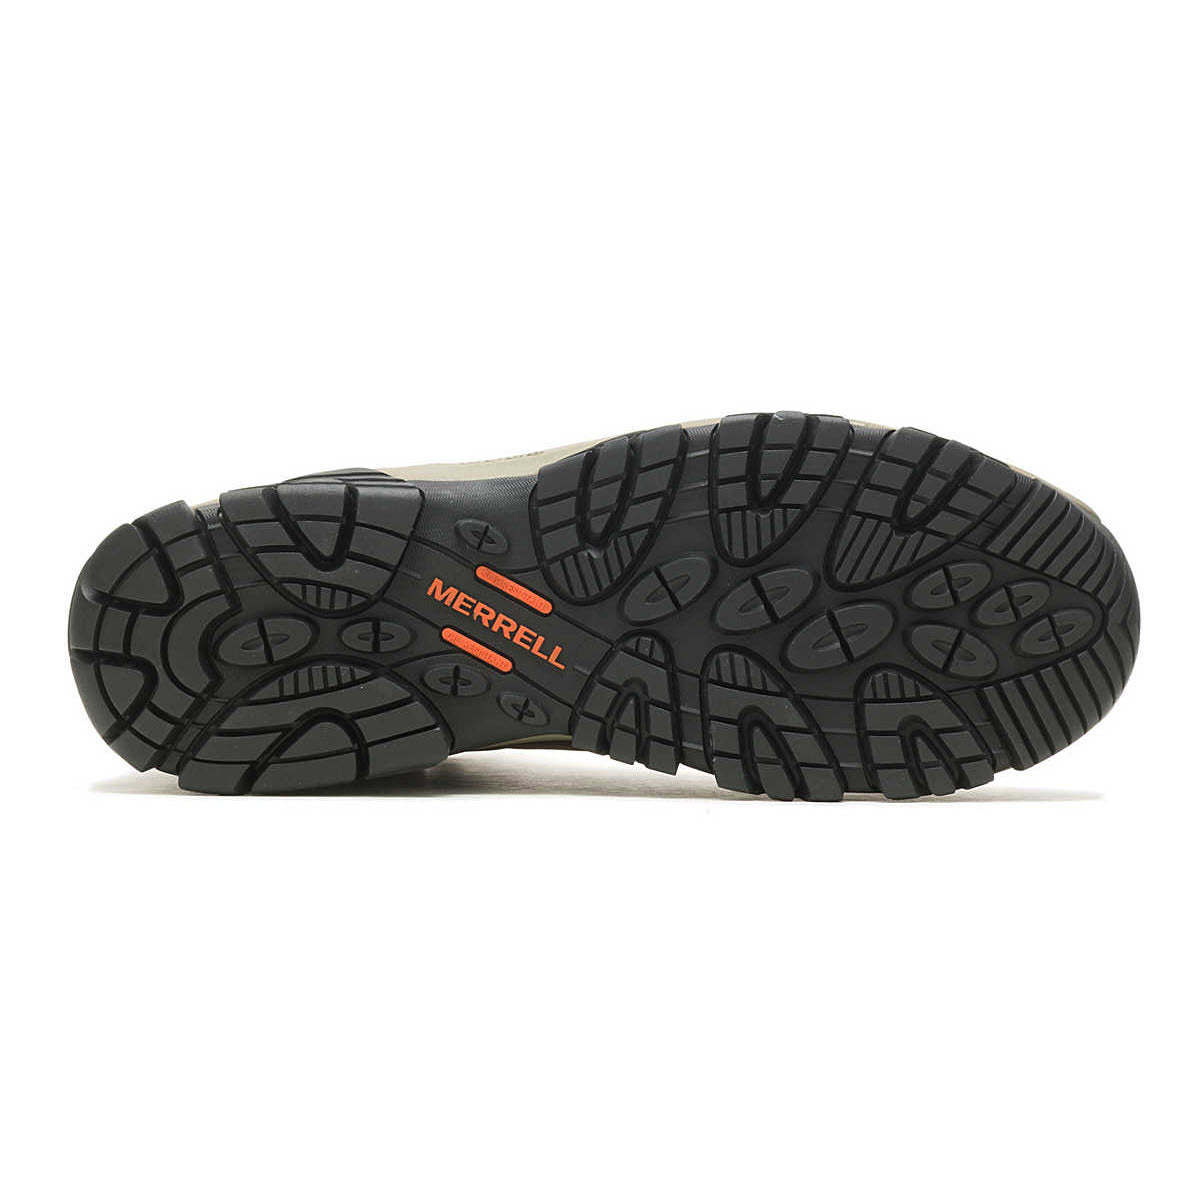 Bottom view of a Merrell Phaserbound 2 Mid Waterproof CF shoe showcasing its black treaded sole with brand logo.